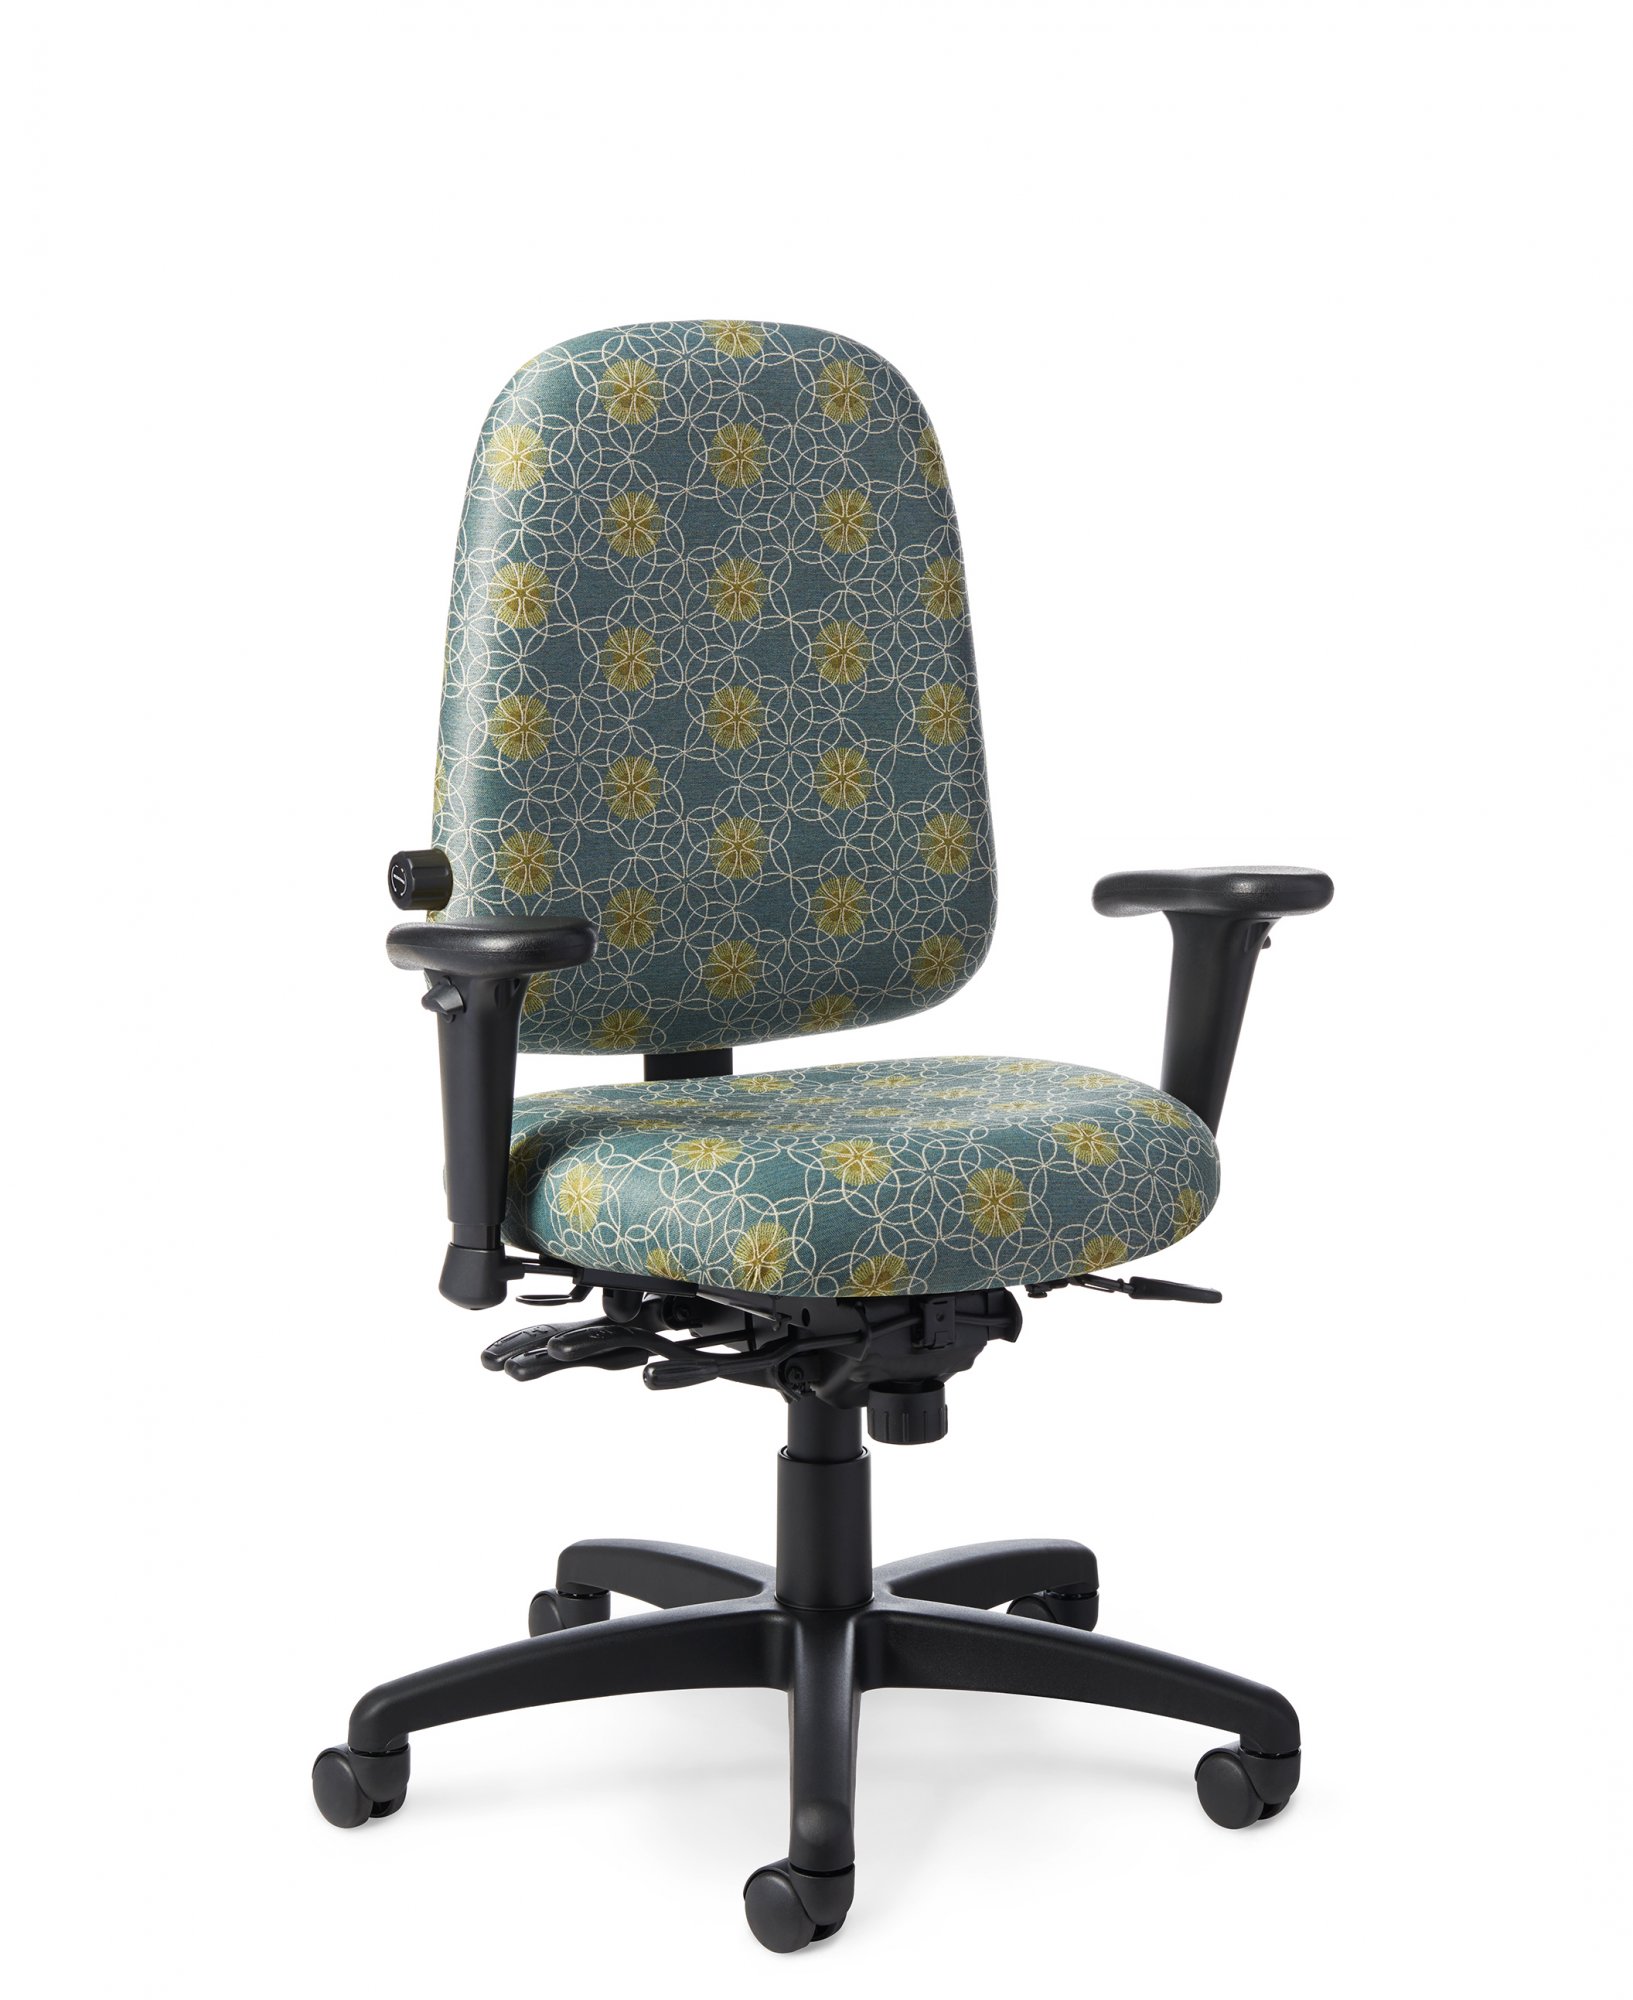 https://www.ergodirect.com/images/Office_Master_Chairs/14761/alternative/Office-Master-7780-Paramount-Cross-Performance-Executive-Chair.jpg